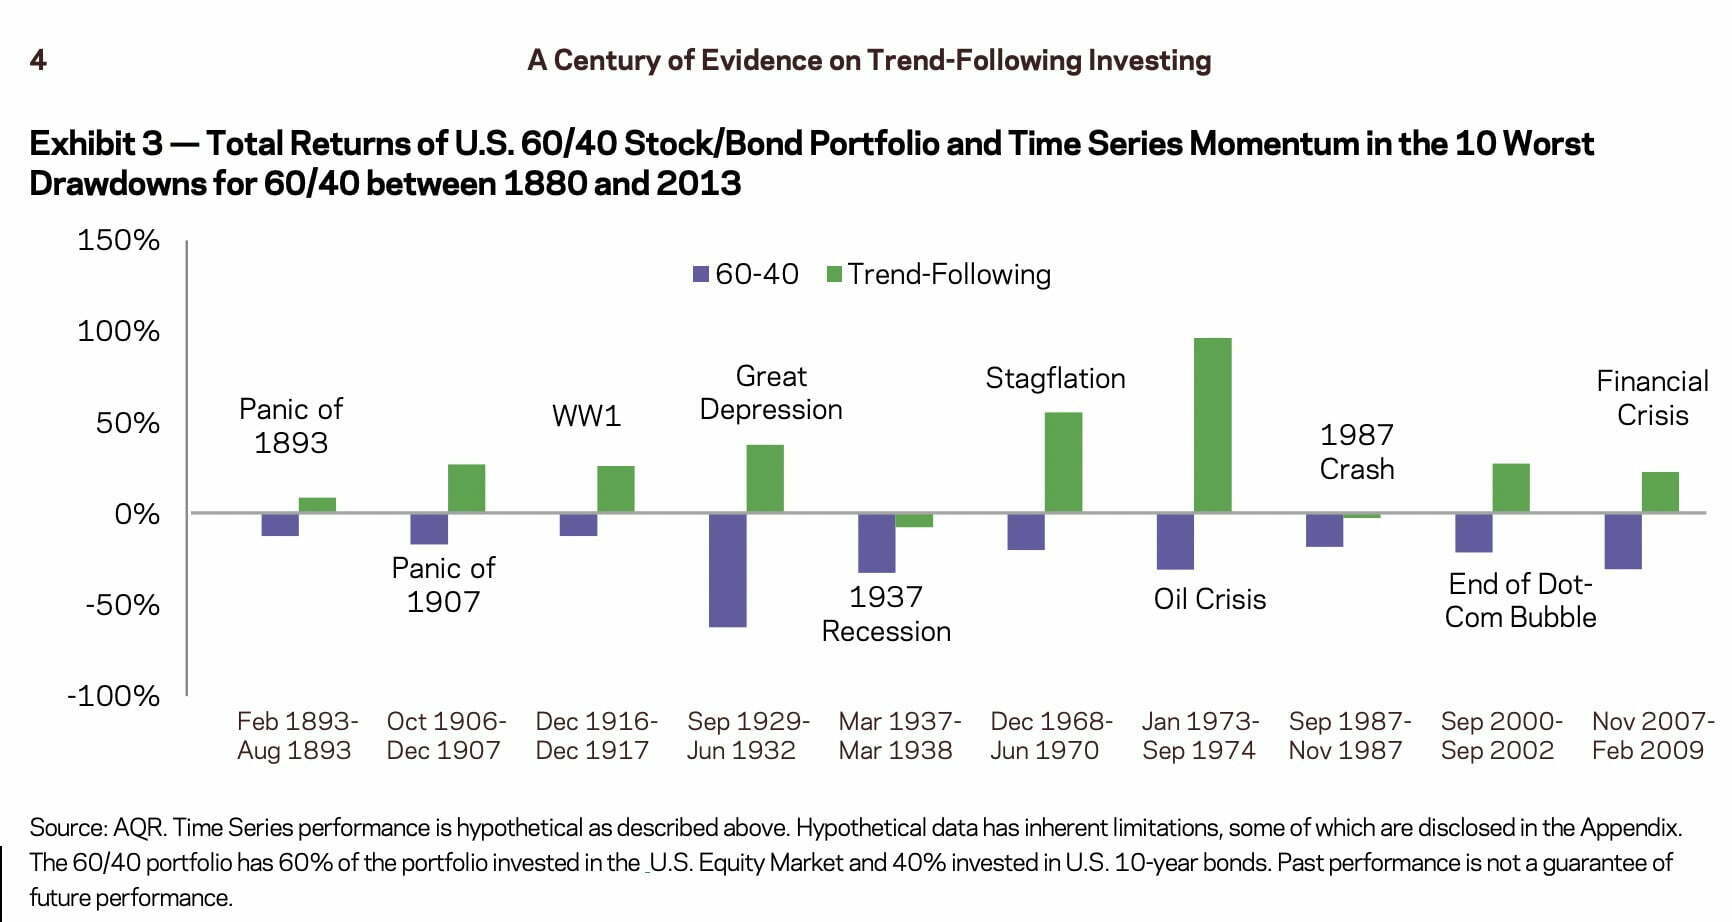 A Century Of Evidence On Trend-Following Investing during 60/40 stocks/bonds portfolios between 1880 and 2013